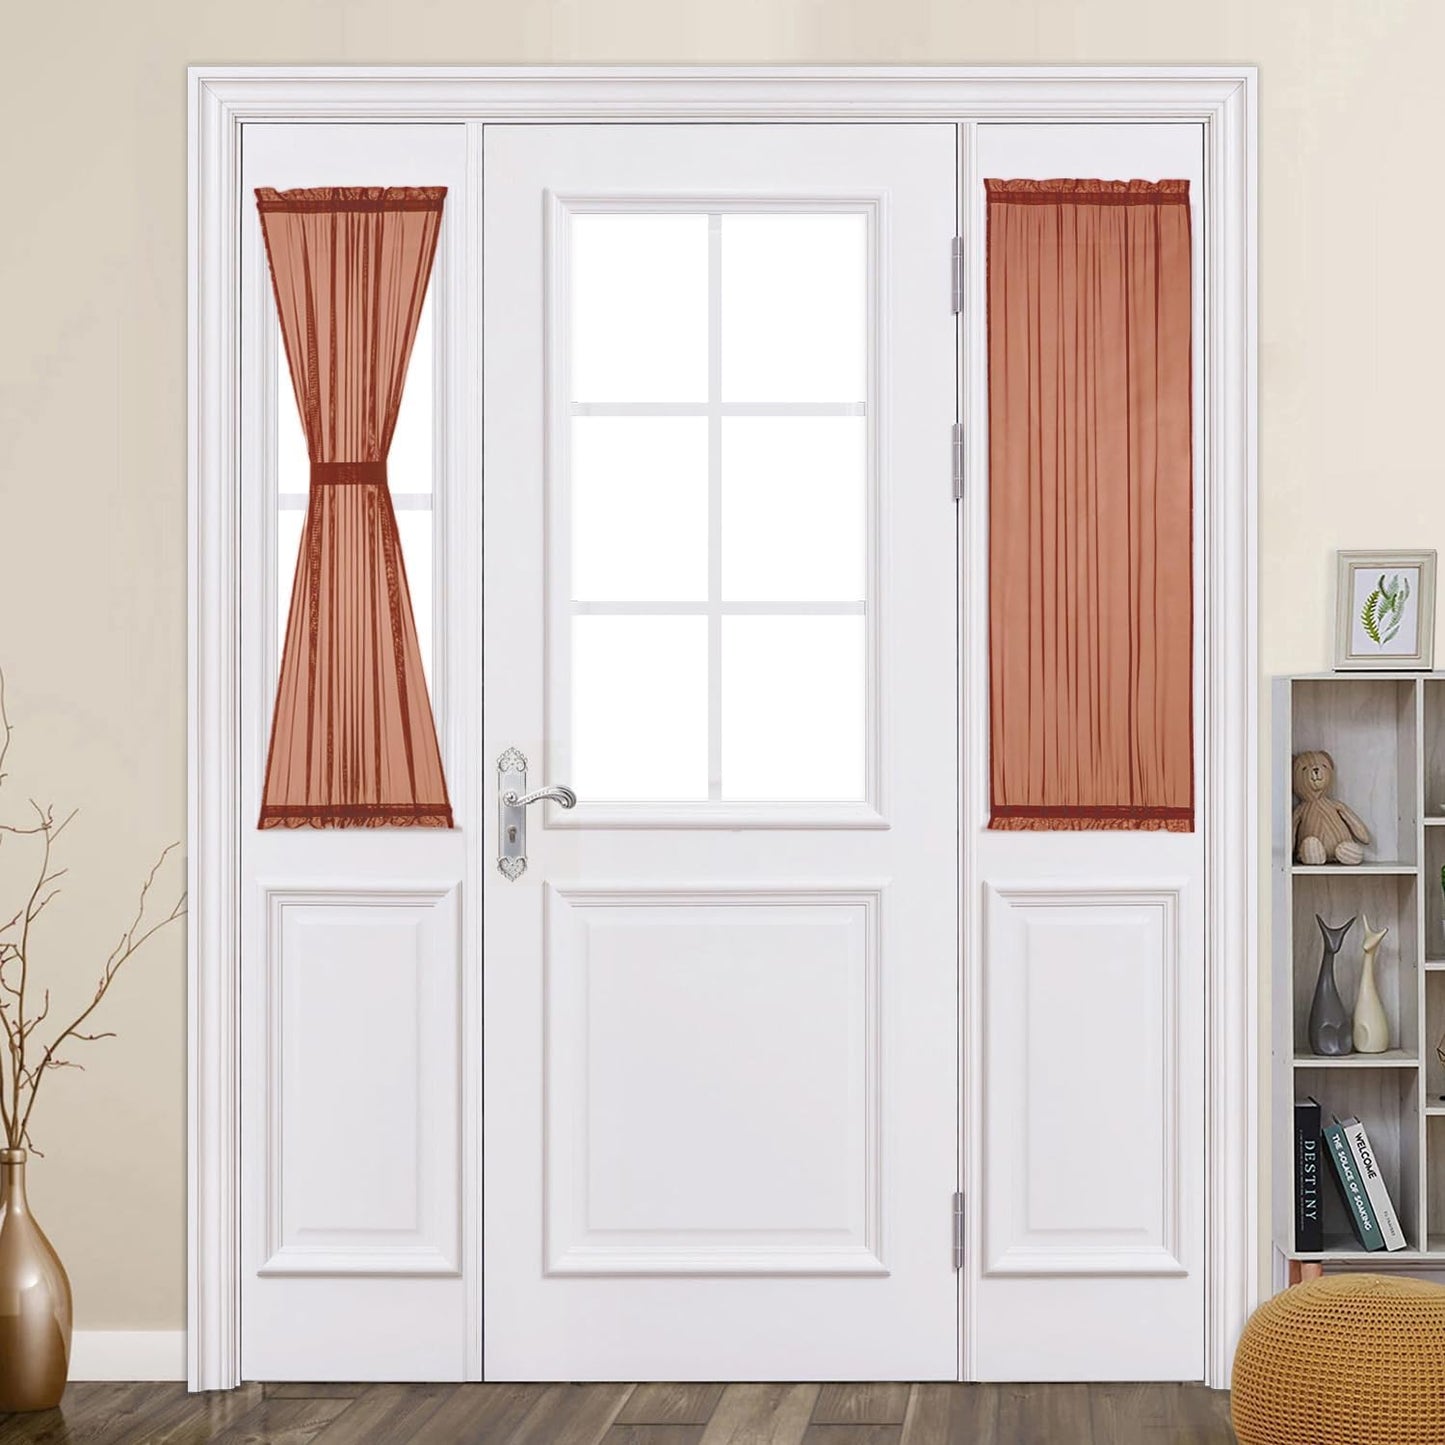 MIULEE French Door Sheer Curtains for Front Back Patio Glass Door Light Filtering Window Treatment with 2 Tiebacks 54 Wide and 72 Inches Length, White, Set of 2  MIULEE Burnt Orange 25"W X 40"L 